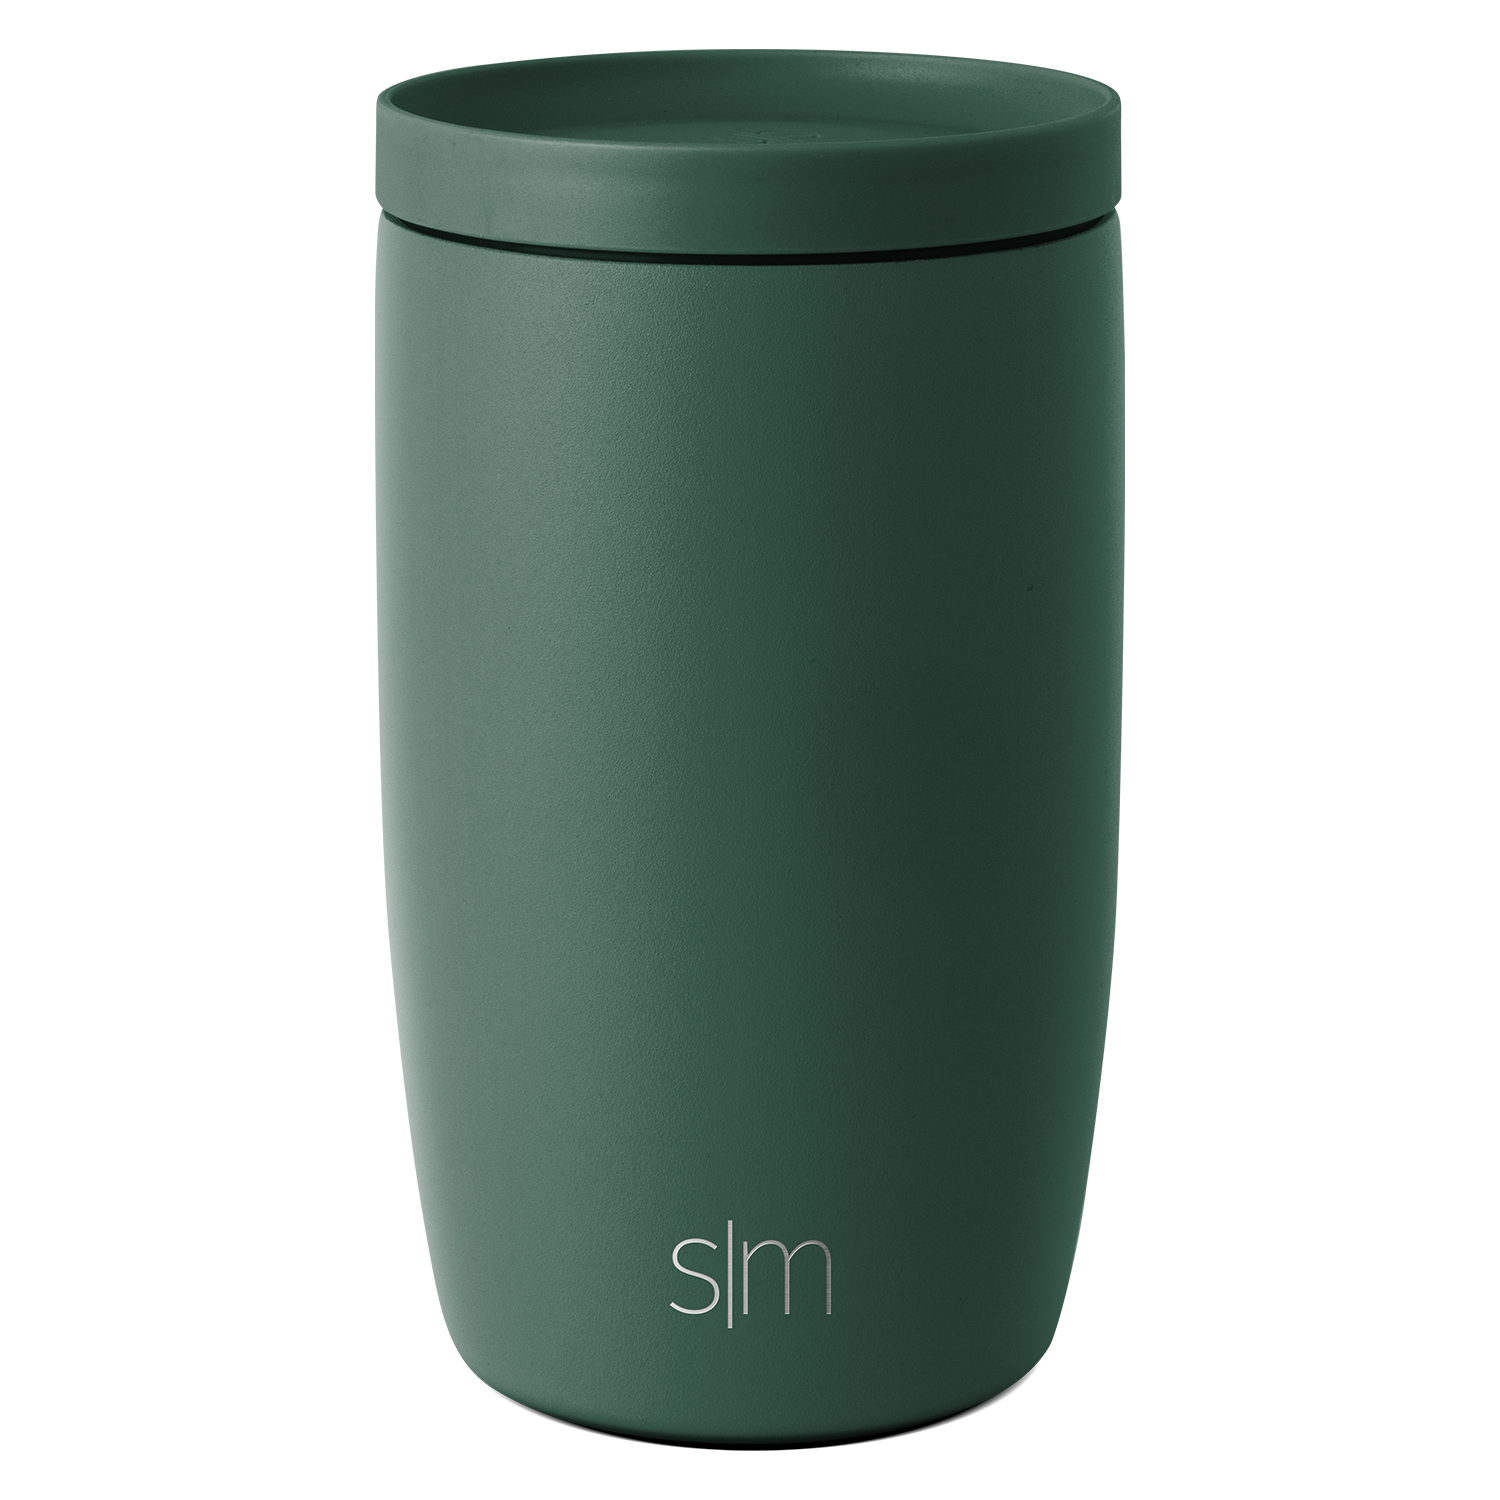 Voyager Tumbler with 360° Lid